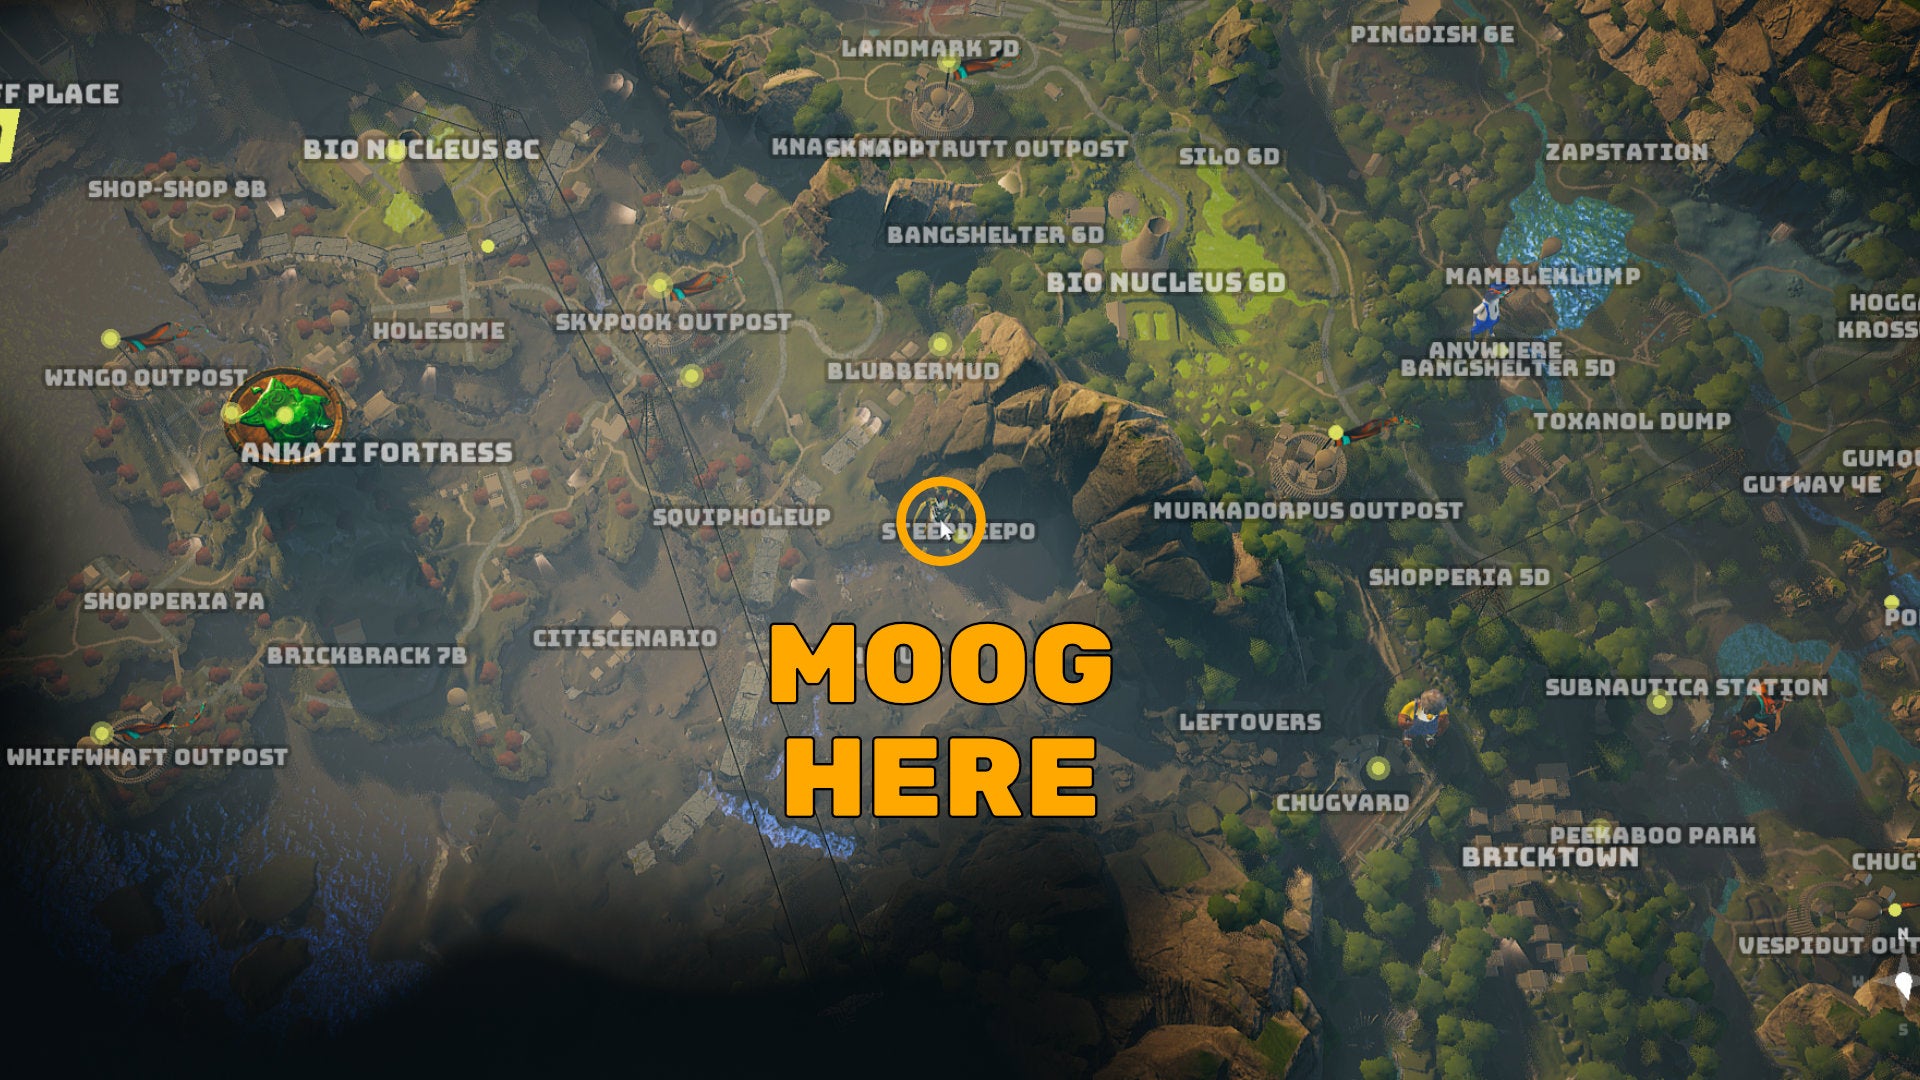 A screenshot of part of the Biomutant map, with the location of the character Moog highlighted.